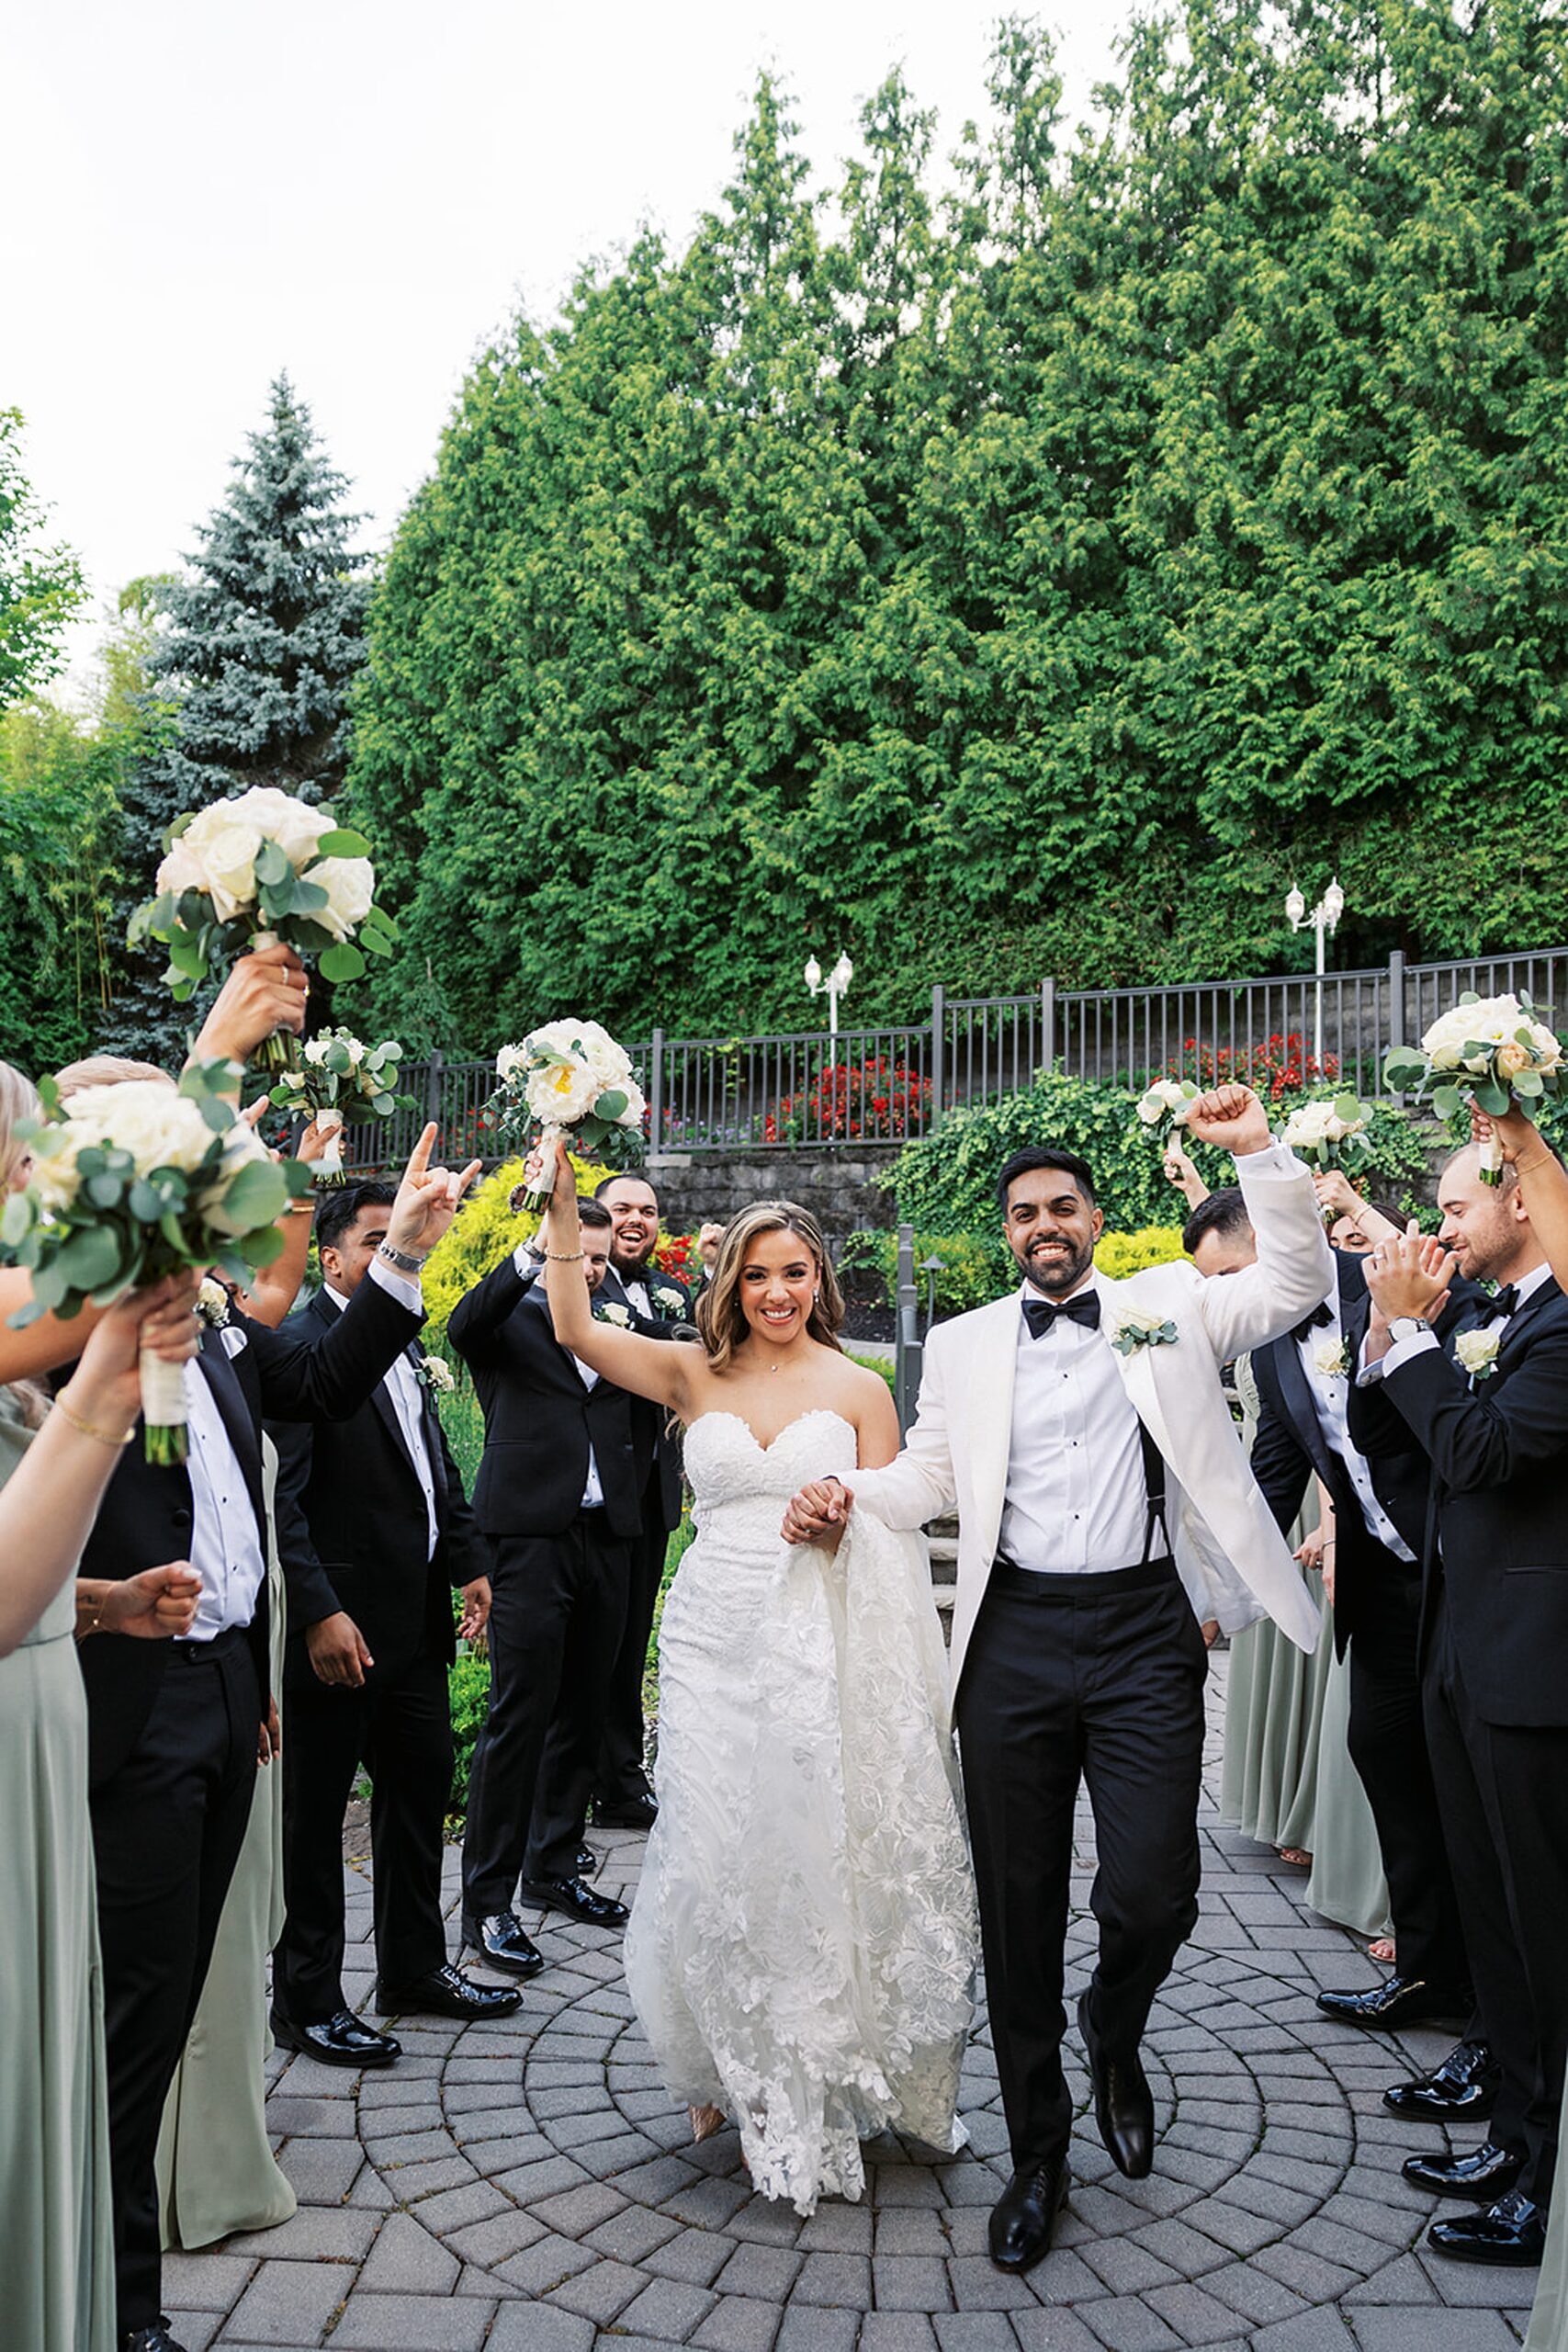 Newlyweds walk through an aisle formed by their wedding party as they all celebrate and cheer